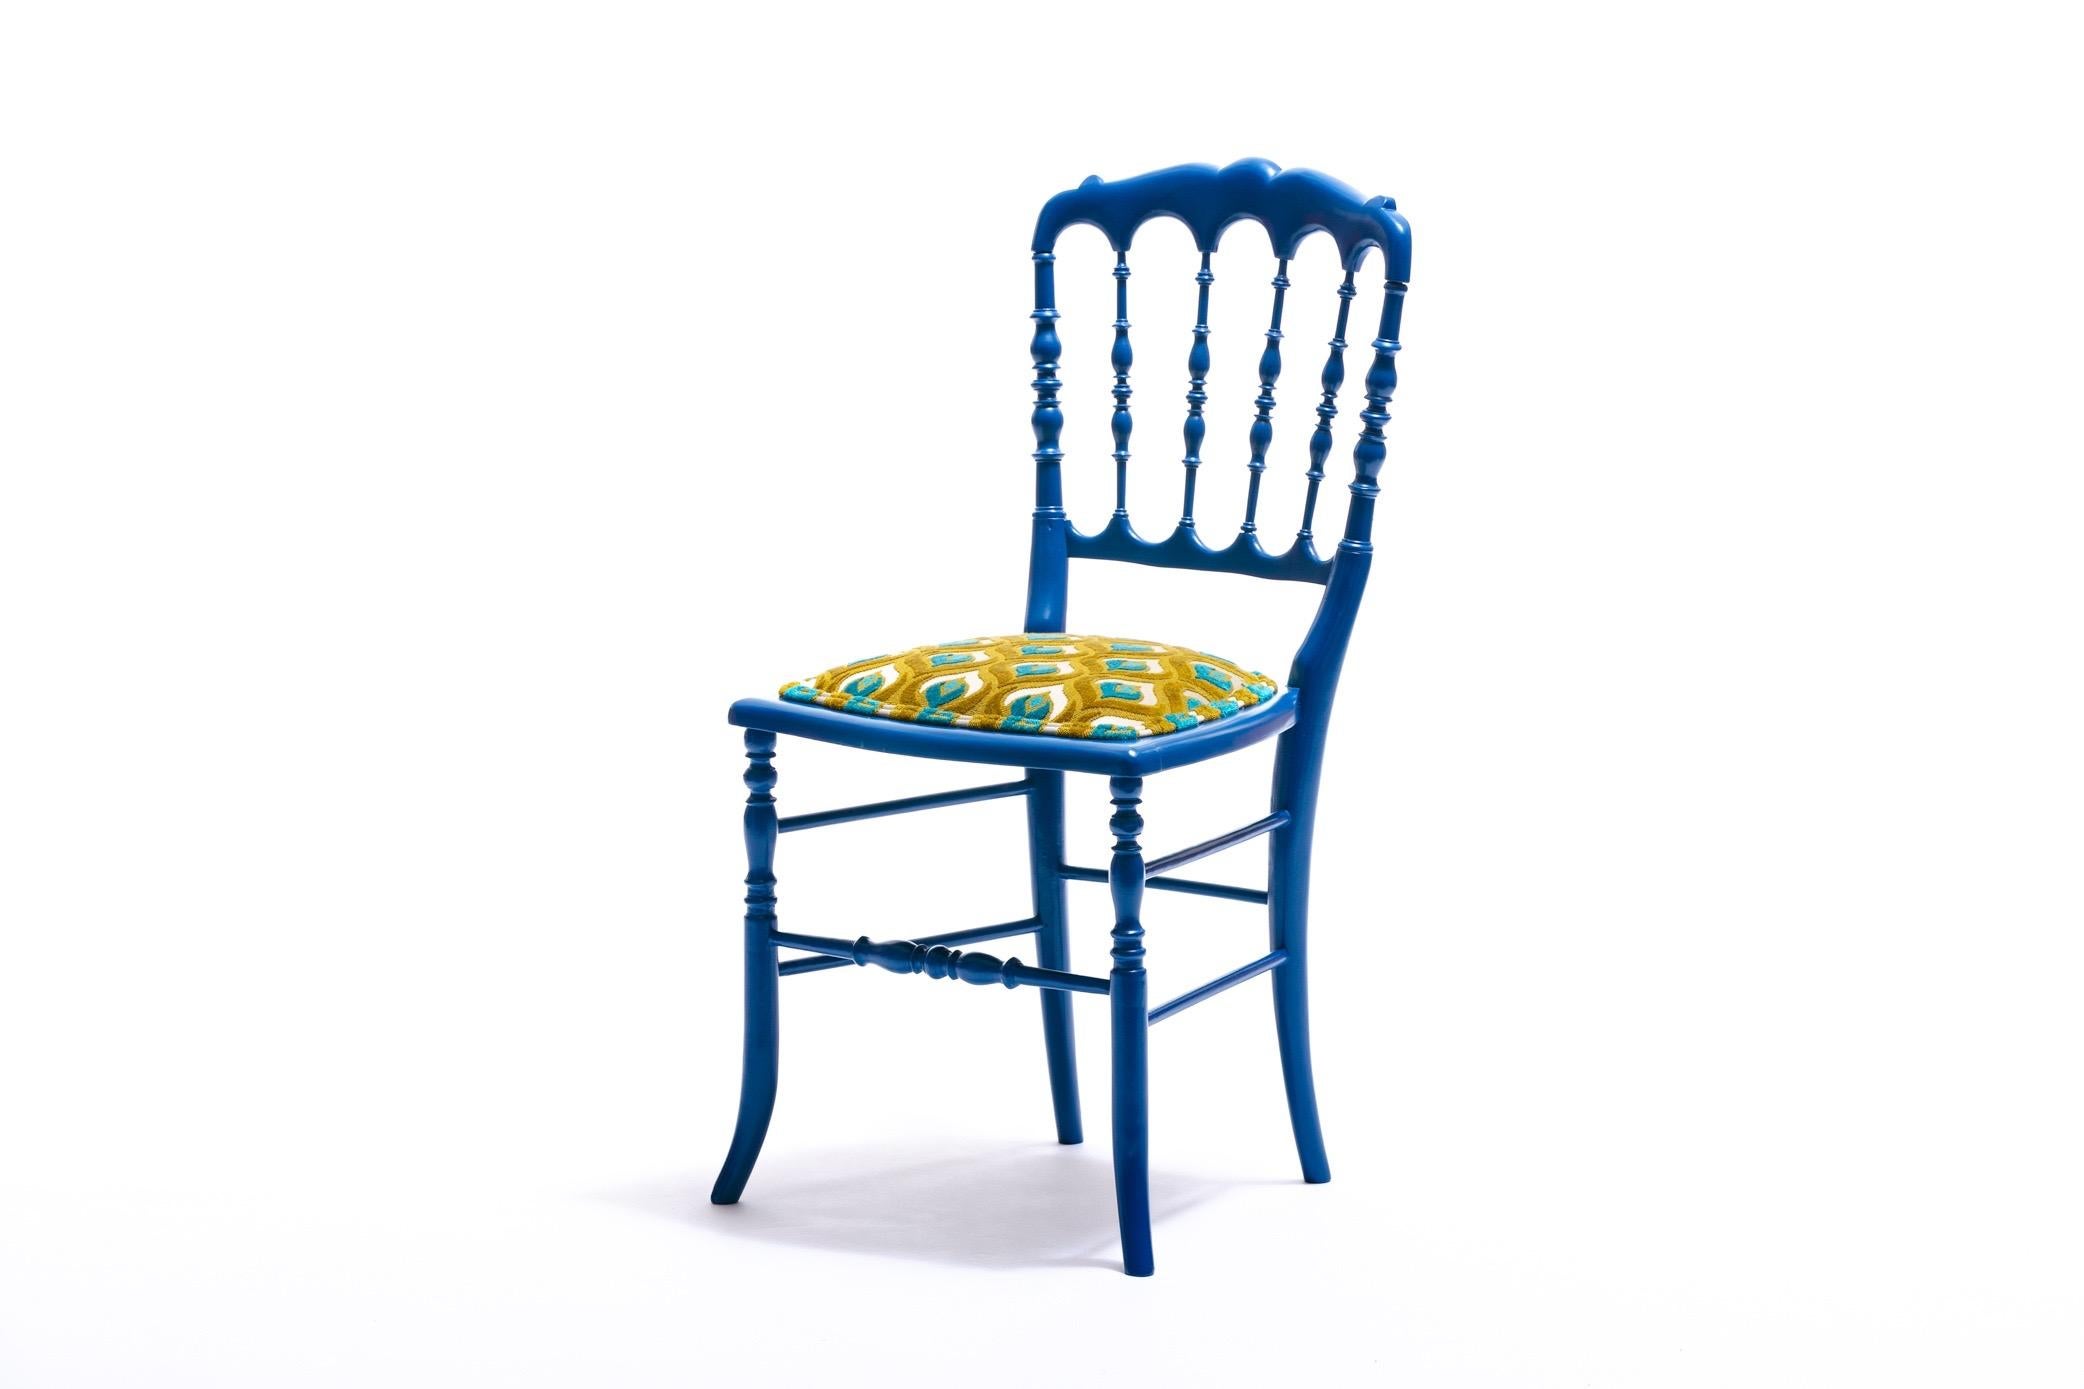 Grab it before it's gone! Sculptural, luxurious, joyous and chic, circa 1960. Our one-of-a-kind Chiavari chair was professionally lacquered in the most perfect hue of blue and its seat expertly reupholstered in a rich cut velvet fabric that features